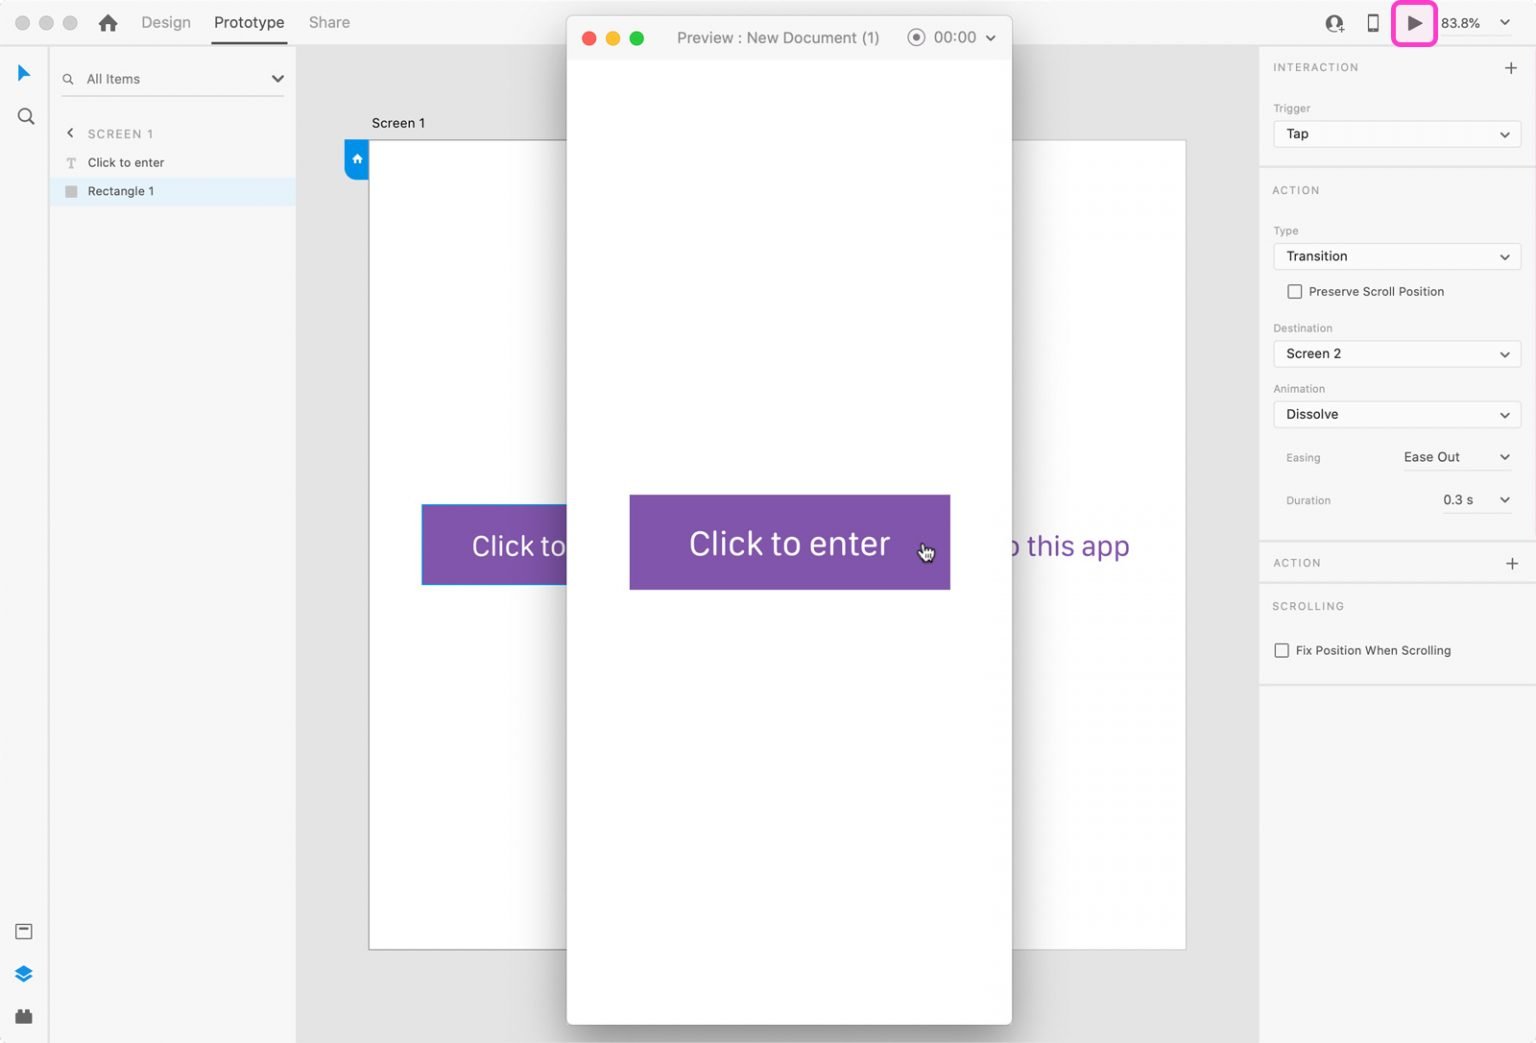 can you download a adobe xd template from published prototype